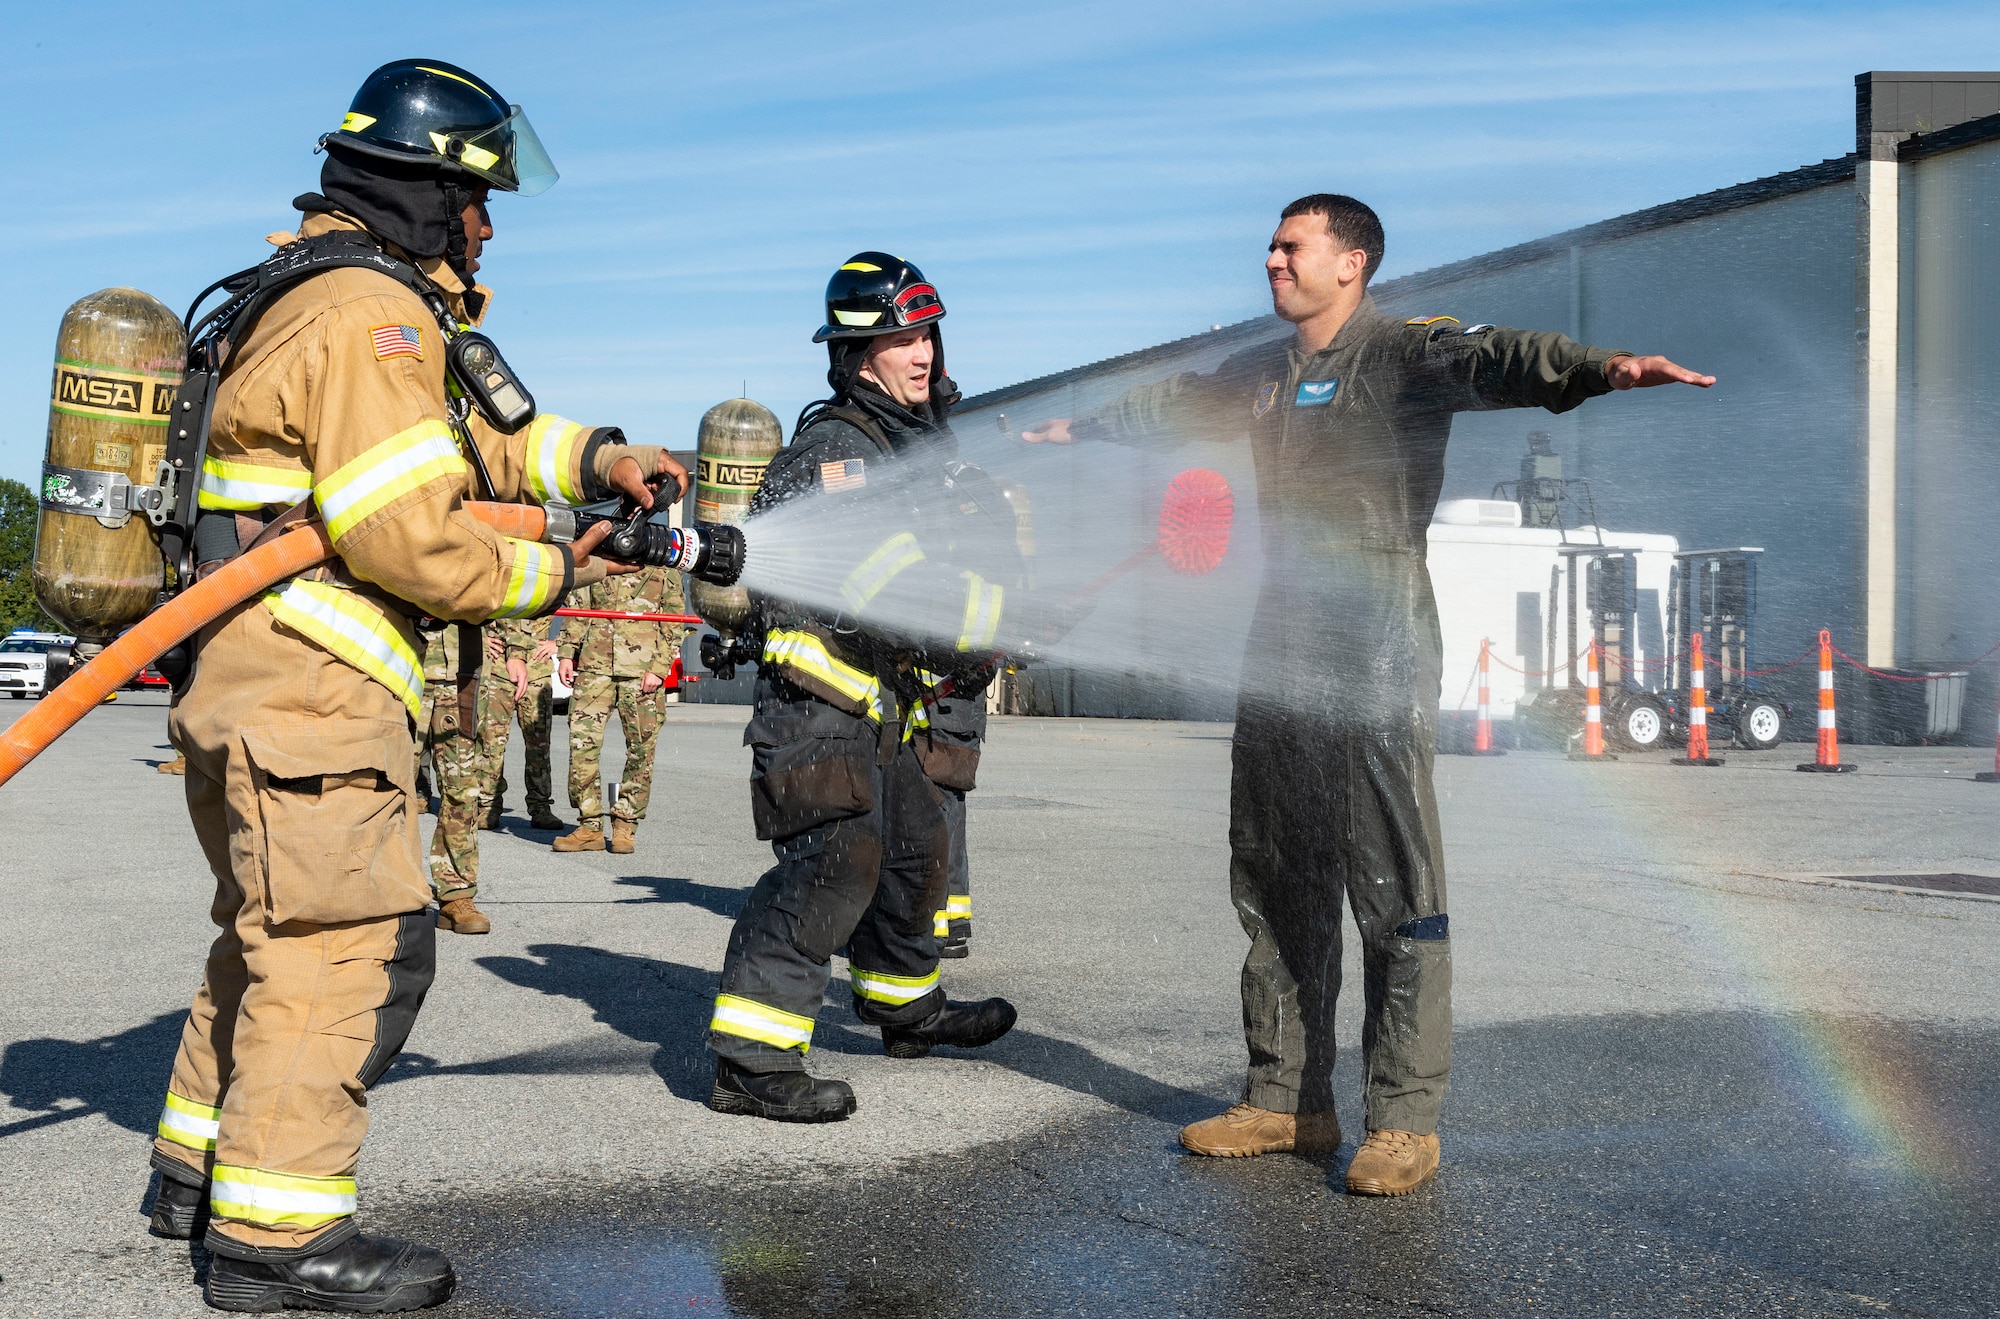 Firemen from the 436th Civil Engineer Squadron fire department, simulate decontaminating Senior Airman Gianni Maldonado, 9th Airlift Squadron loadmaster, during a Force Protection Major Accident Response Exercise at Dover Air Force Base, Delaware, Oct. 7, 2021. The three-day exercise tested the response capabilities of Team Dover through various scenarios in an effort to strengthen their ability to provide rapid-global mobility in challenging conditions.(U.S. Air Force photo by Roland Balik)